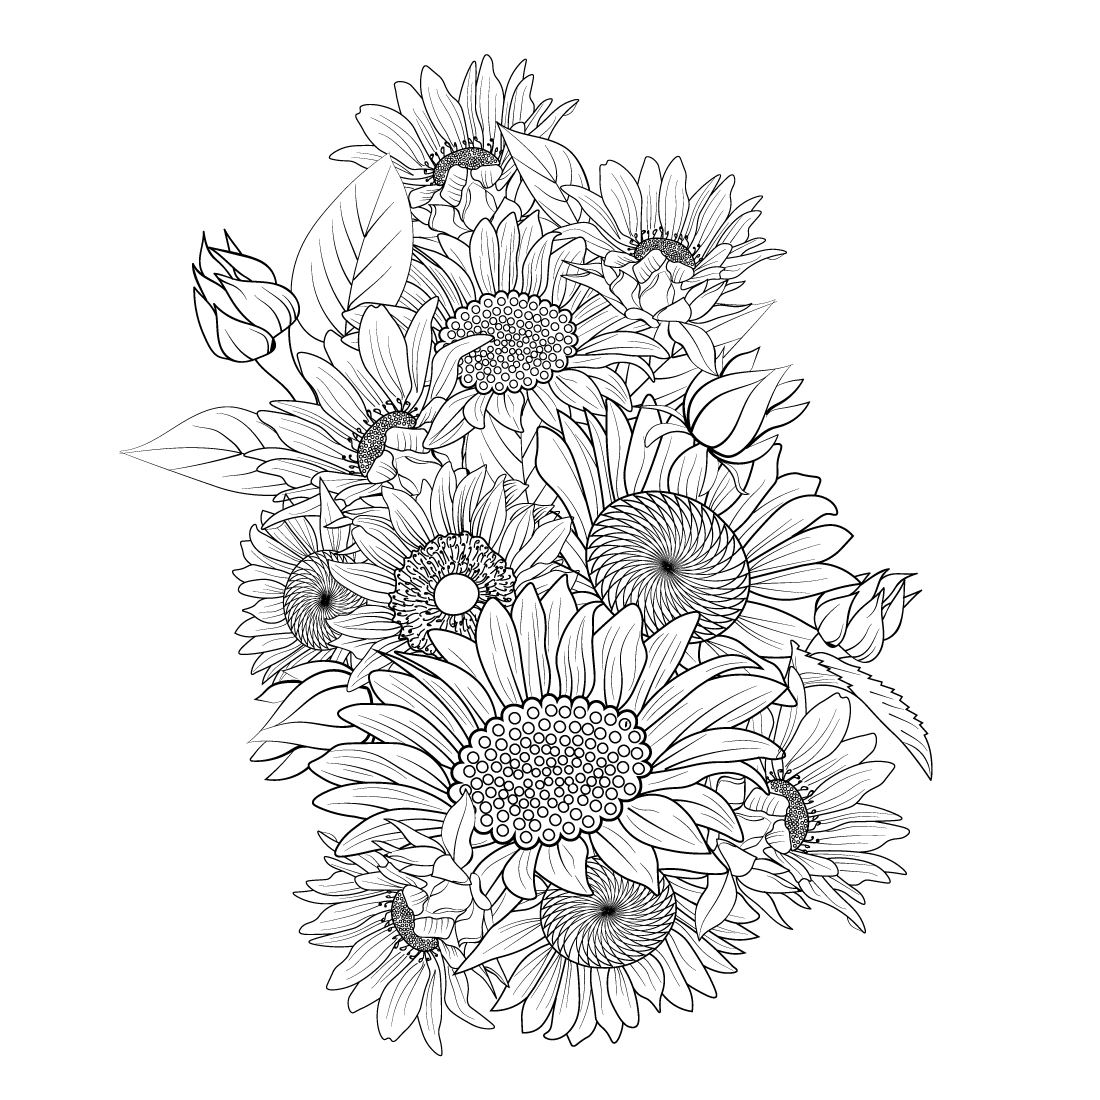 small sunflower drawing tattoo, sunflower tattoo black and white, black and white vintage sunflower tattoo, realistic black and grey sunflower tattoo, outline sunflower tattoo drawing, line drawing outline sunflower, stencil sunflower tattoo outline preview image.